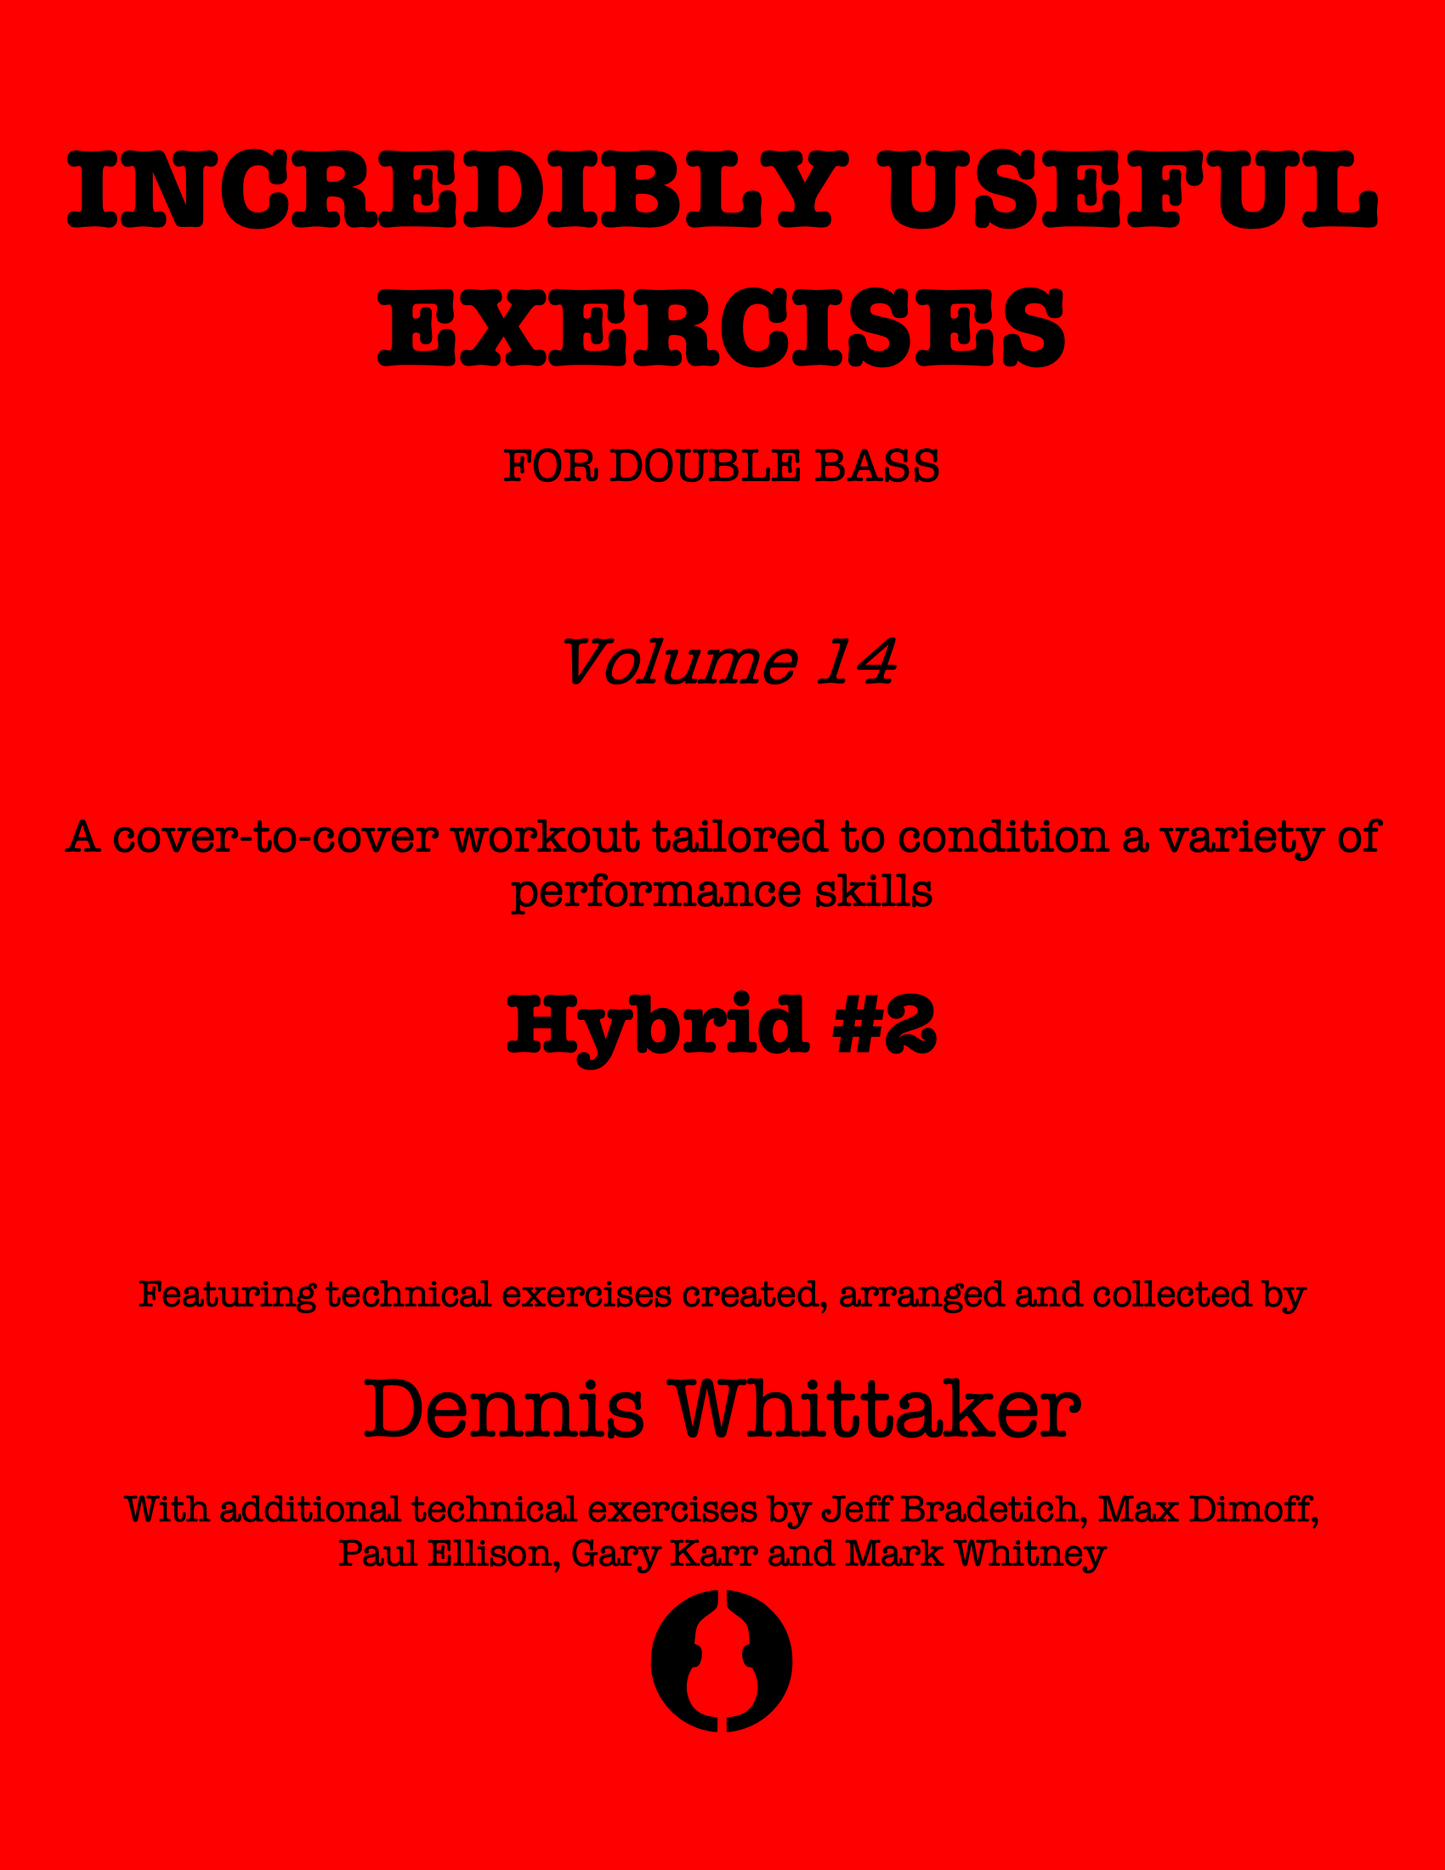 Incredibly Useful Exercises for Double Bass, Vol. 14, Hybrid Workout #2